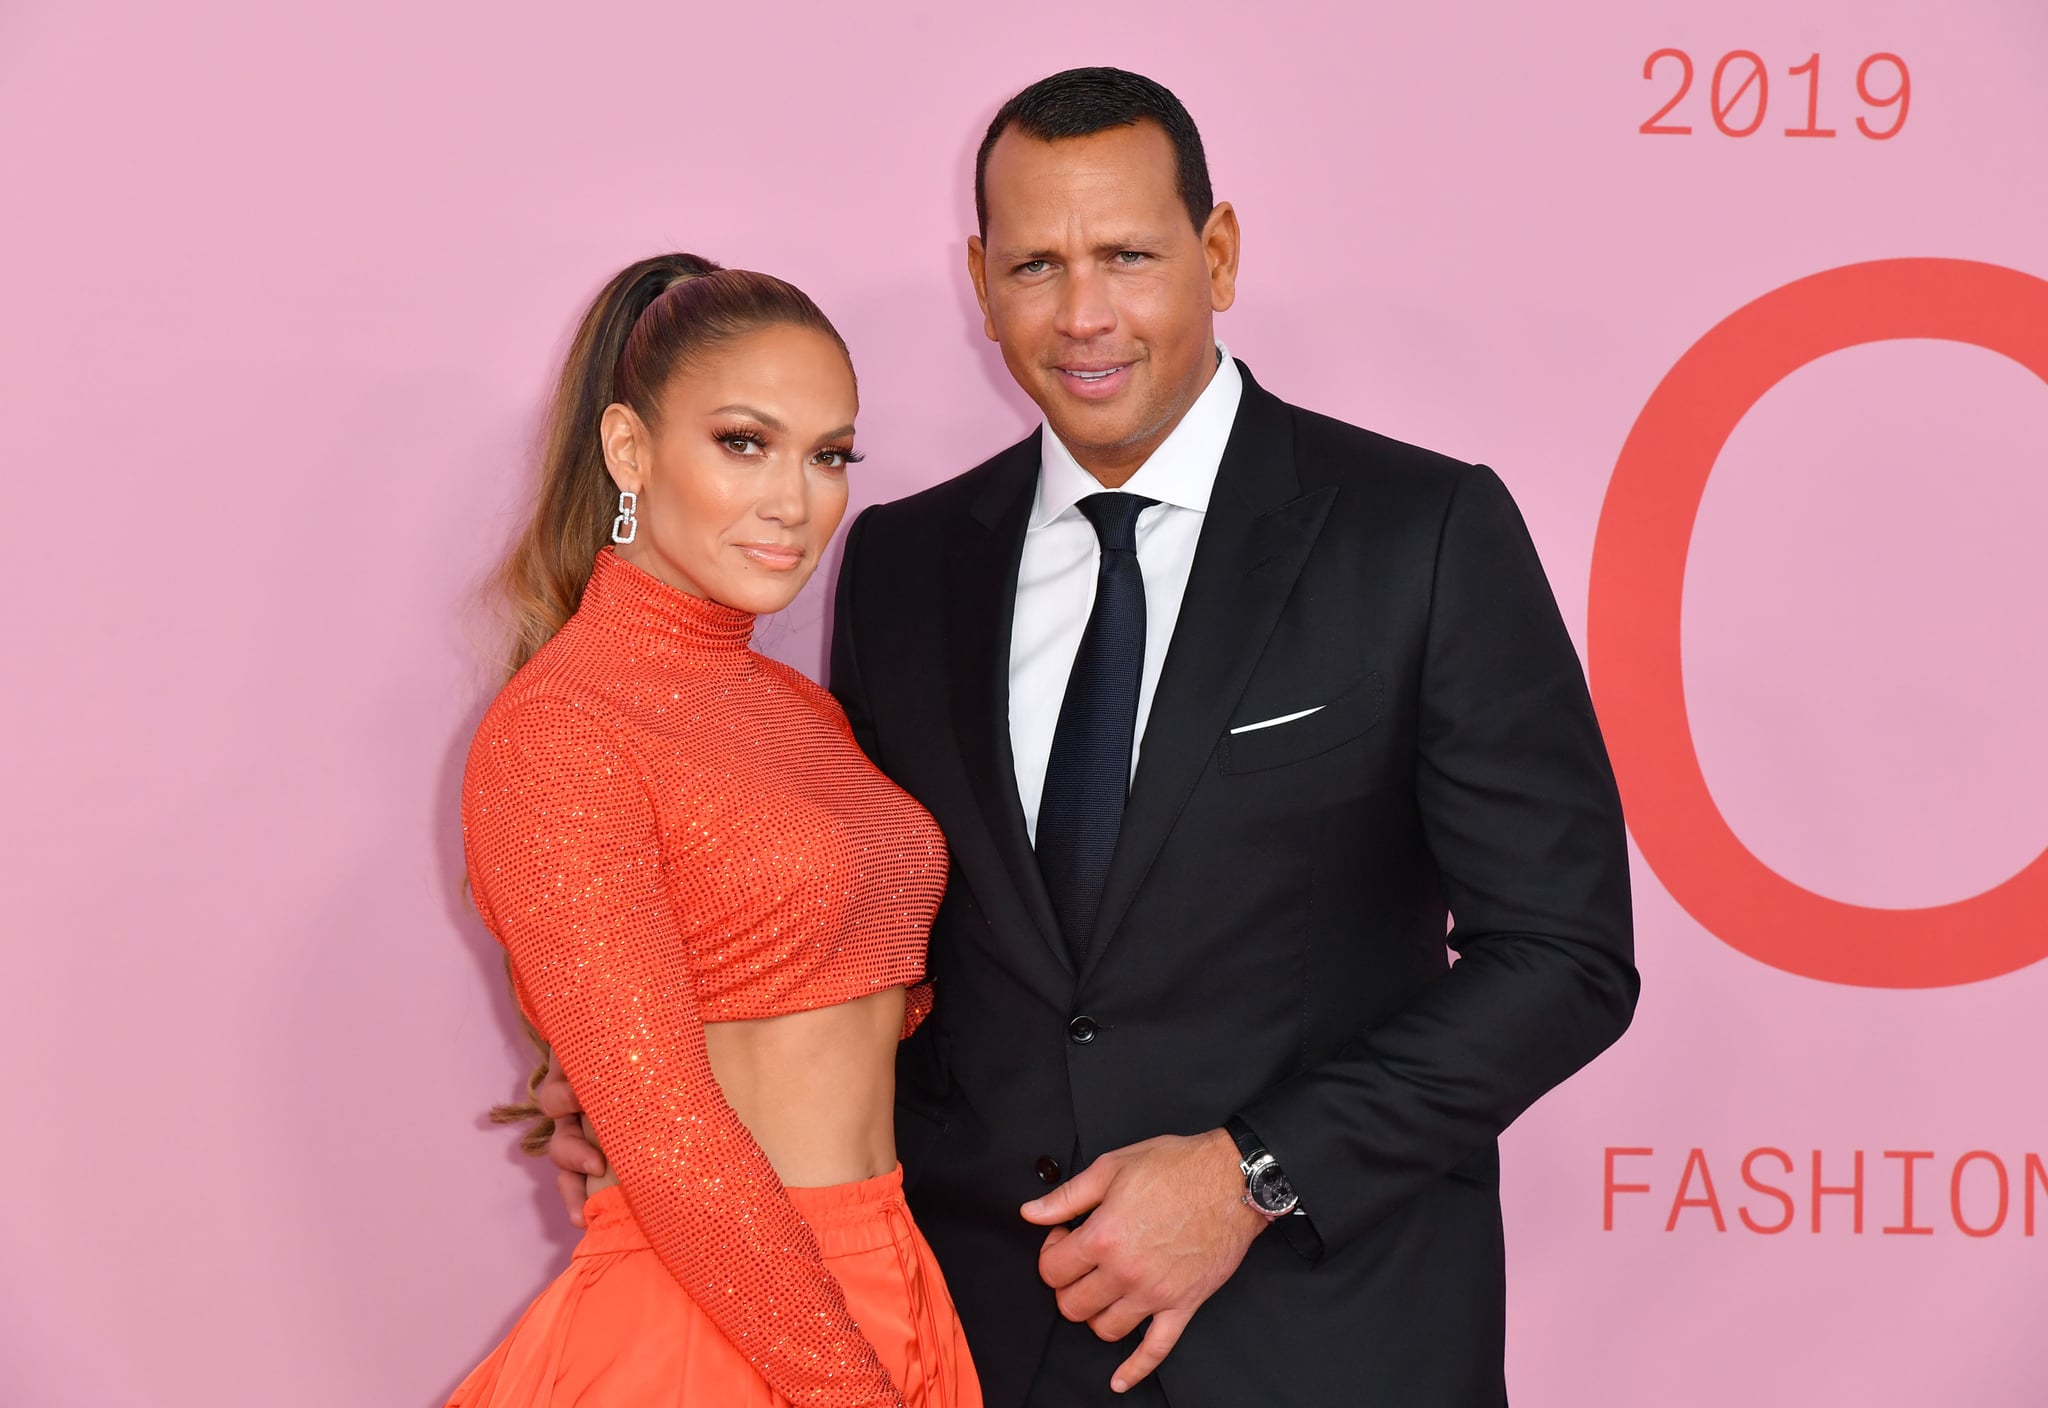 CFDA Fashion Icon Award recipient US singer Jennifer Lopez and fiance former baseball pro Alex Rodriguez arrive for the 2019 CFDA fashion awards at the Brooklyn Museum in New York City on June 3, 2019. (Photo by ANGELA WEISS / AFP)        (Photo credit should read ANGELA WEISS/AFP via Getty Images)